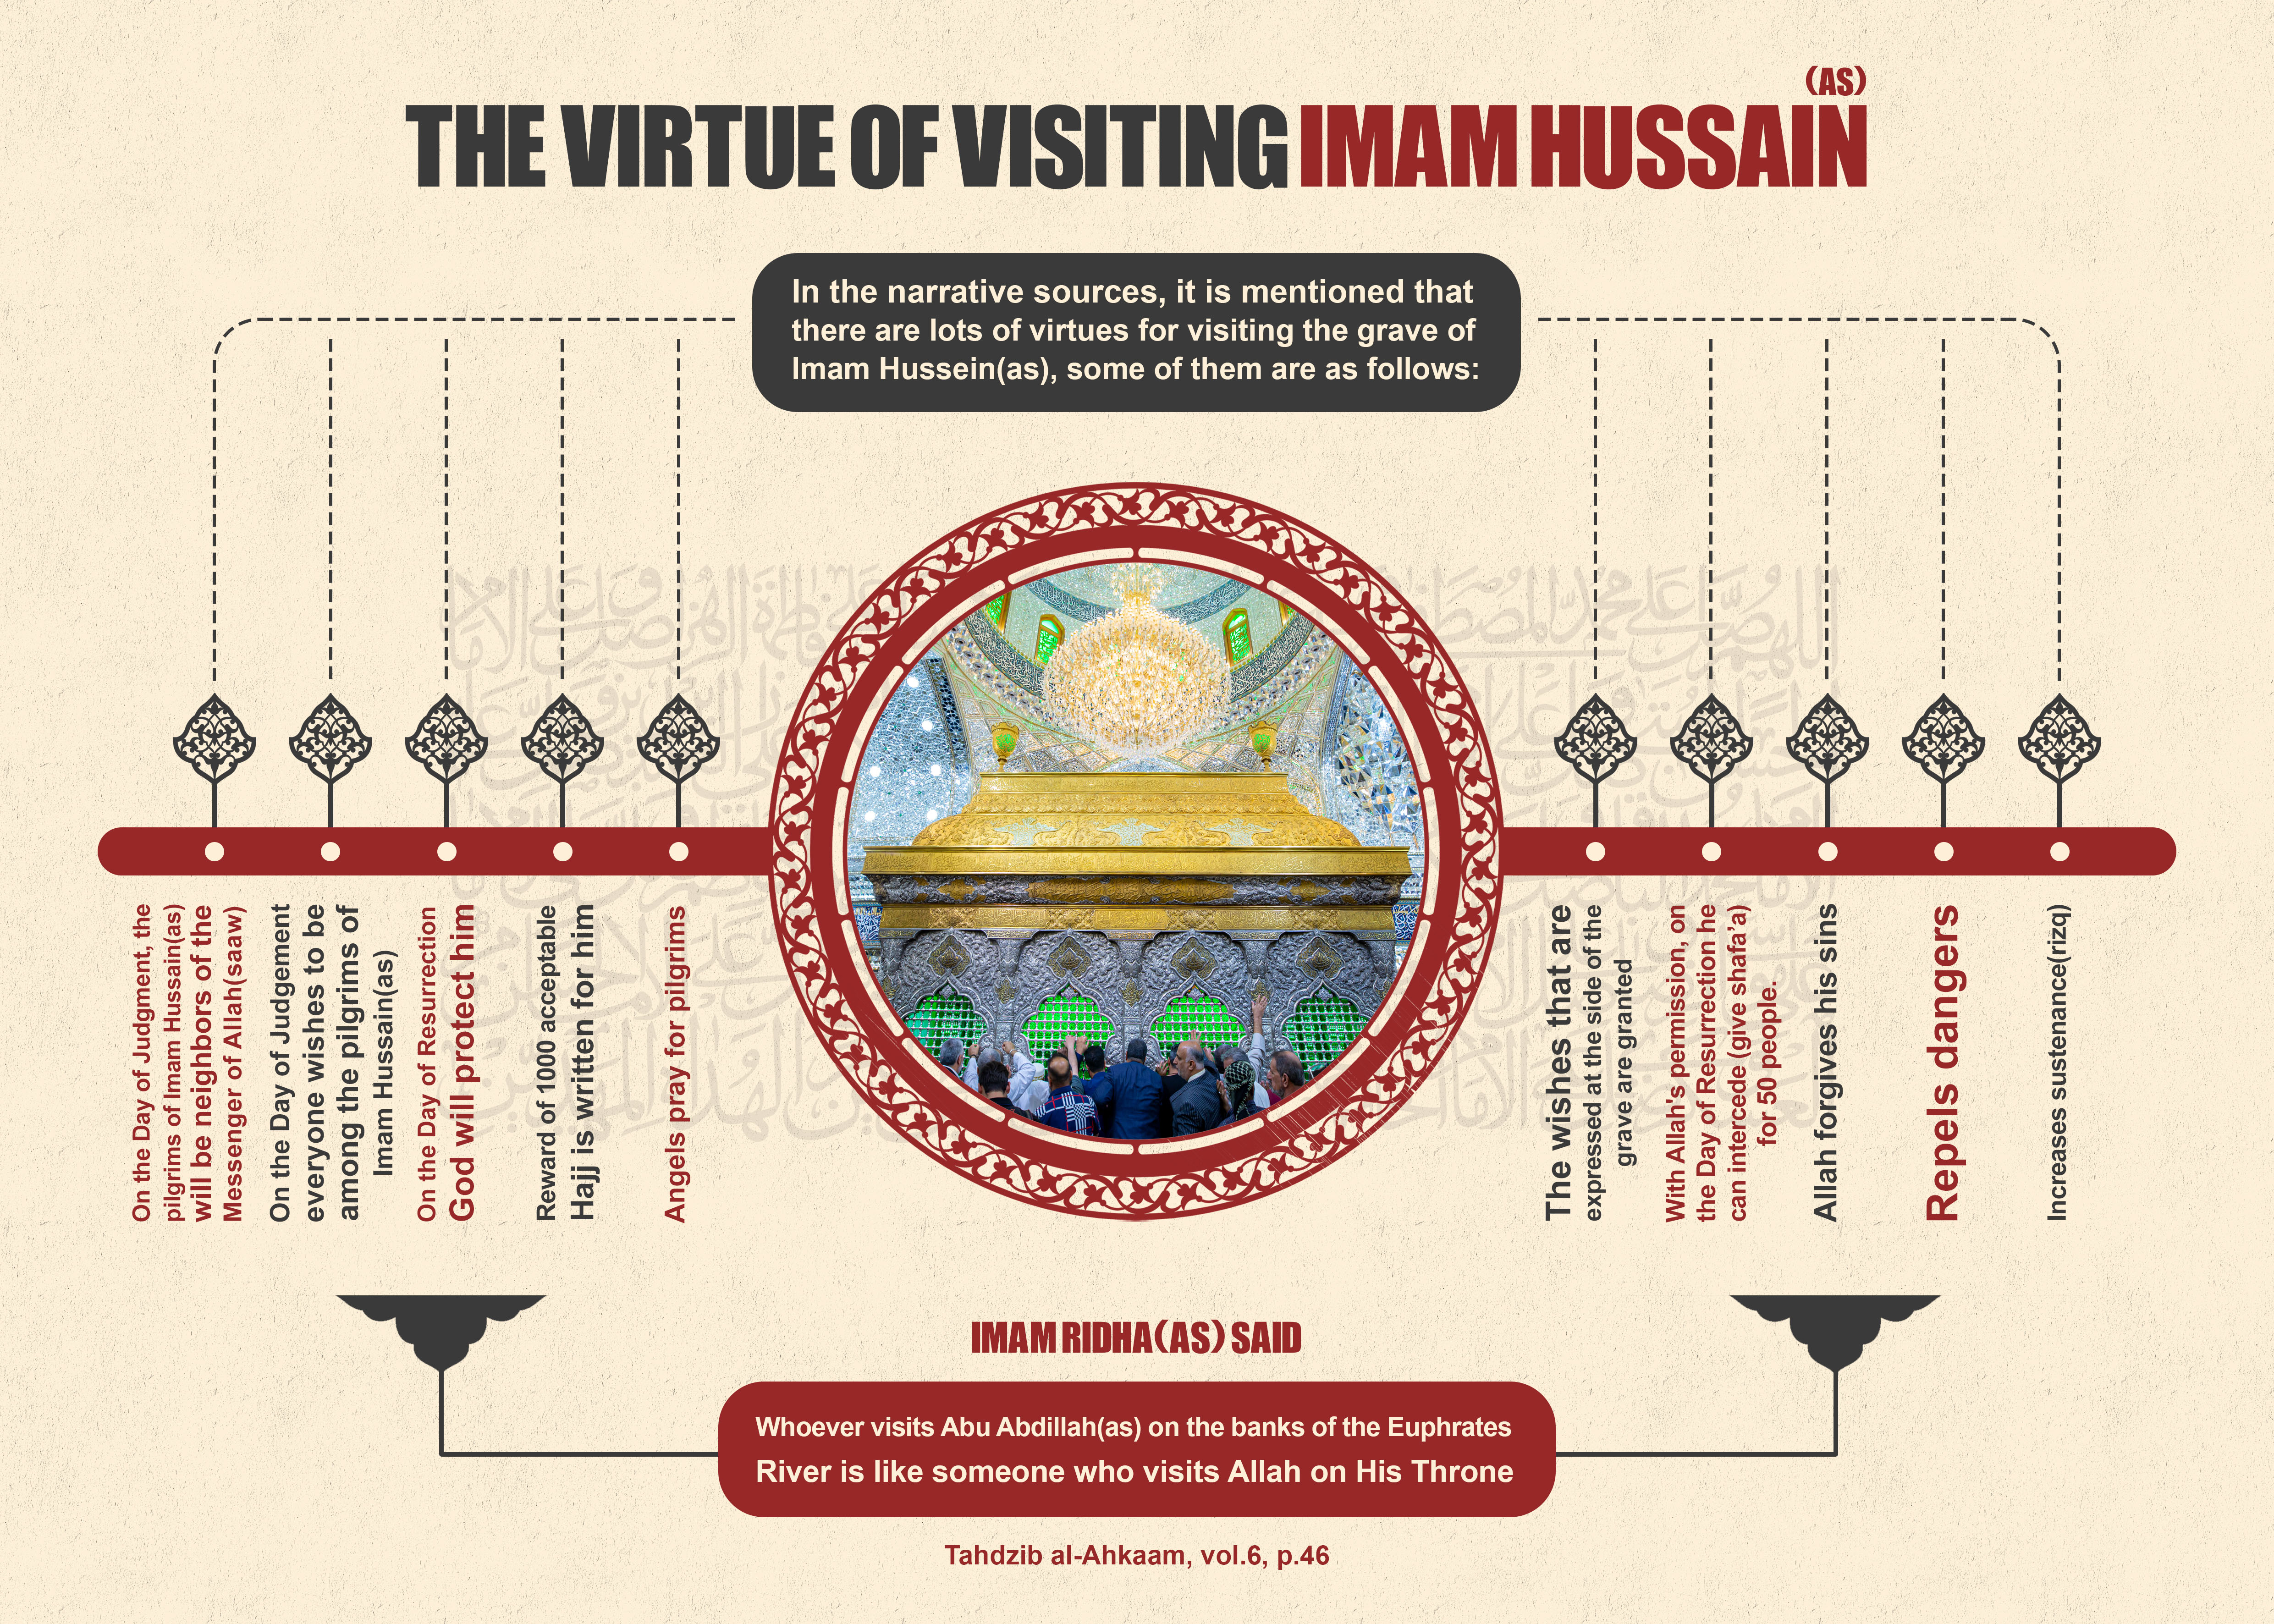 The virtue of visiting Imam Hussain (as)